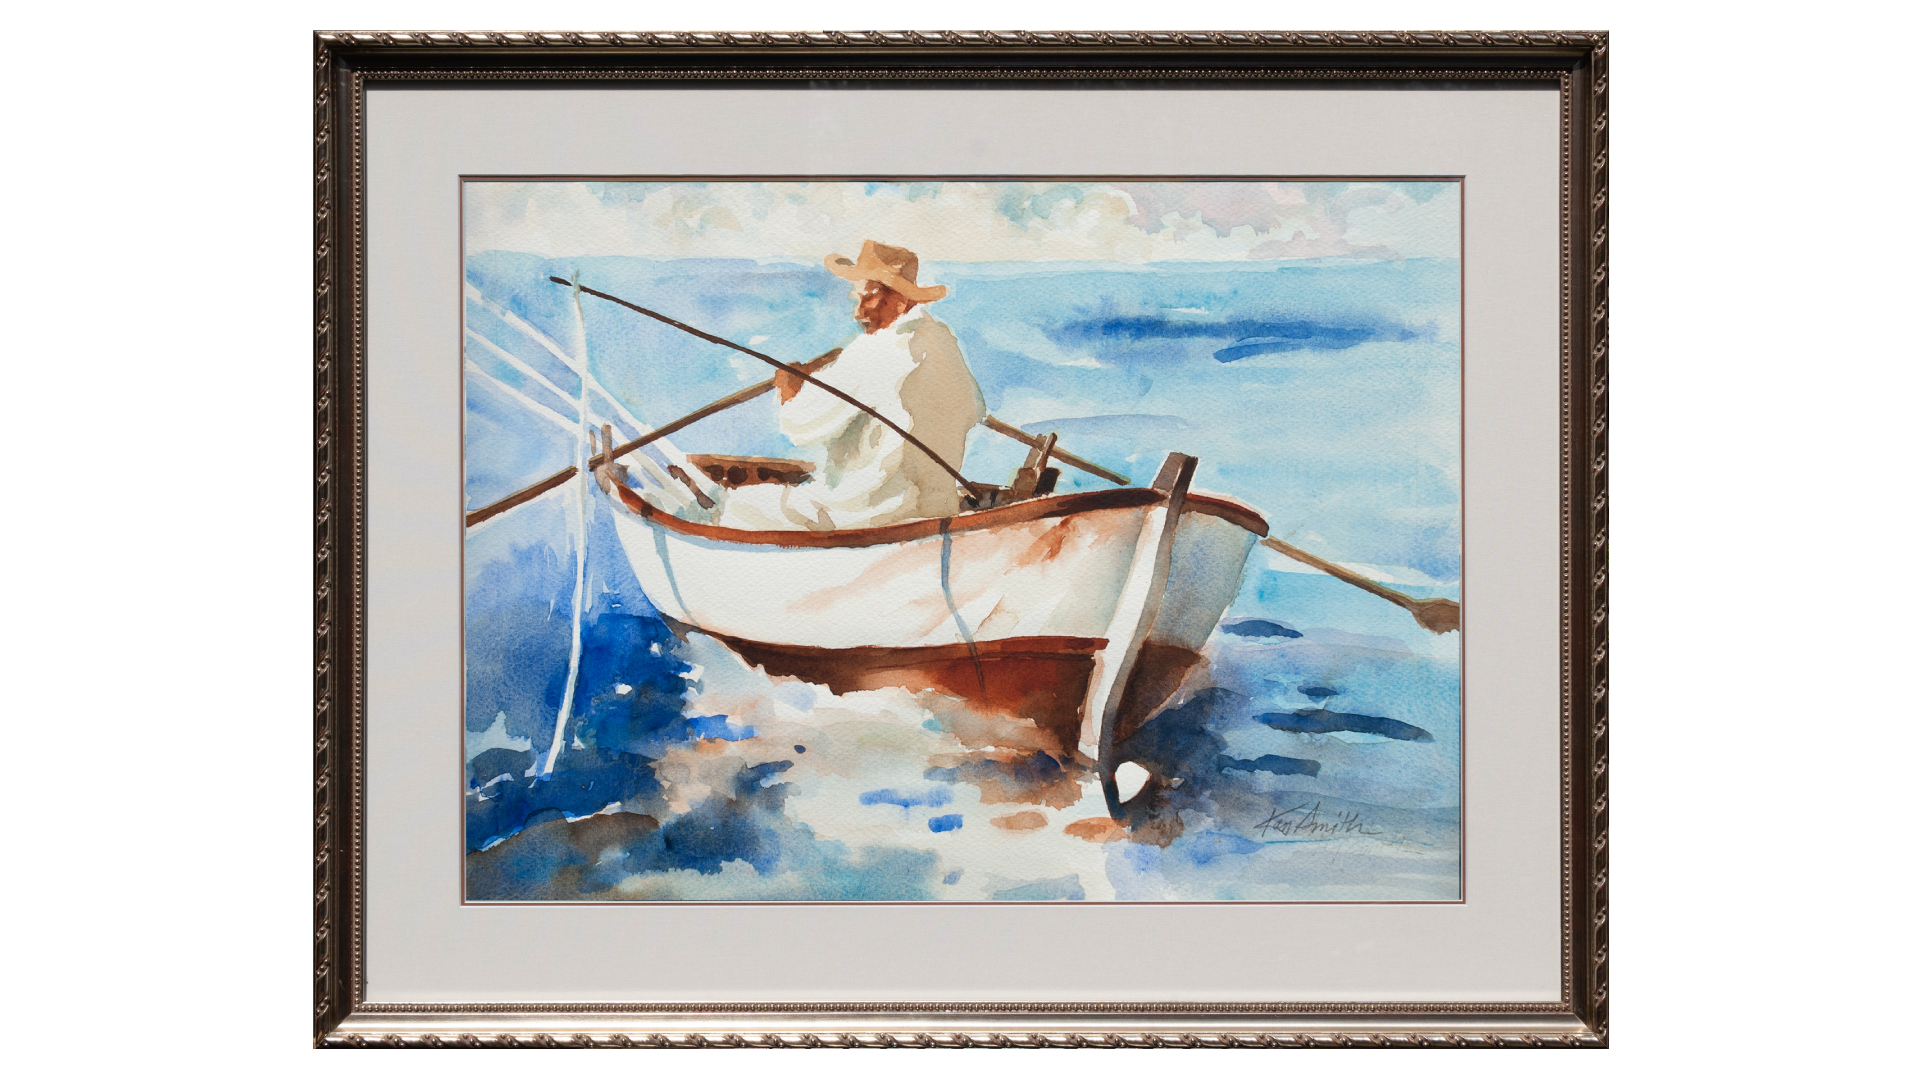 Old Man Setting his Lines Old Man Setting his Lines  17h x22w Framed  $3,800  Old Man and the Sea